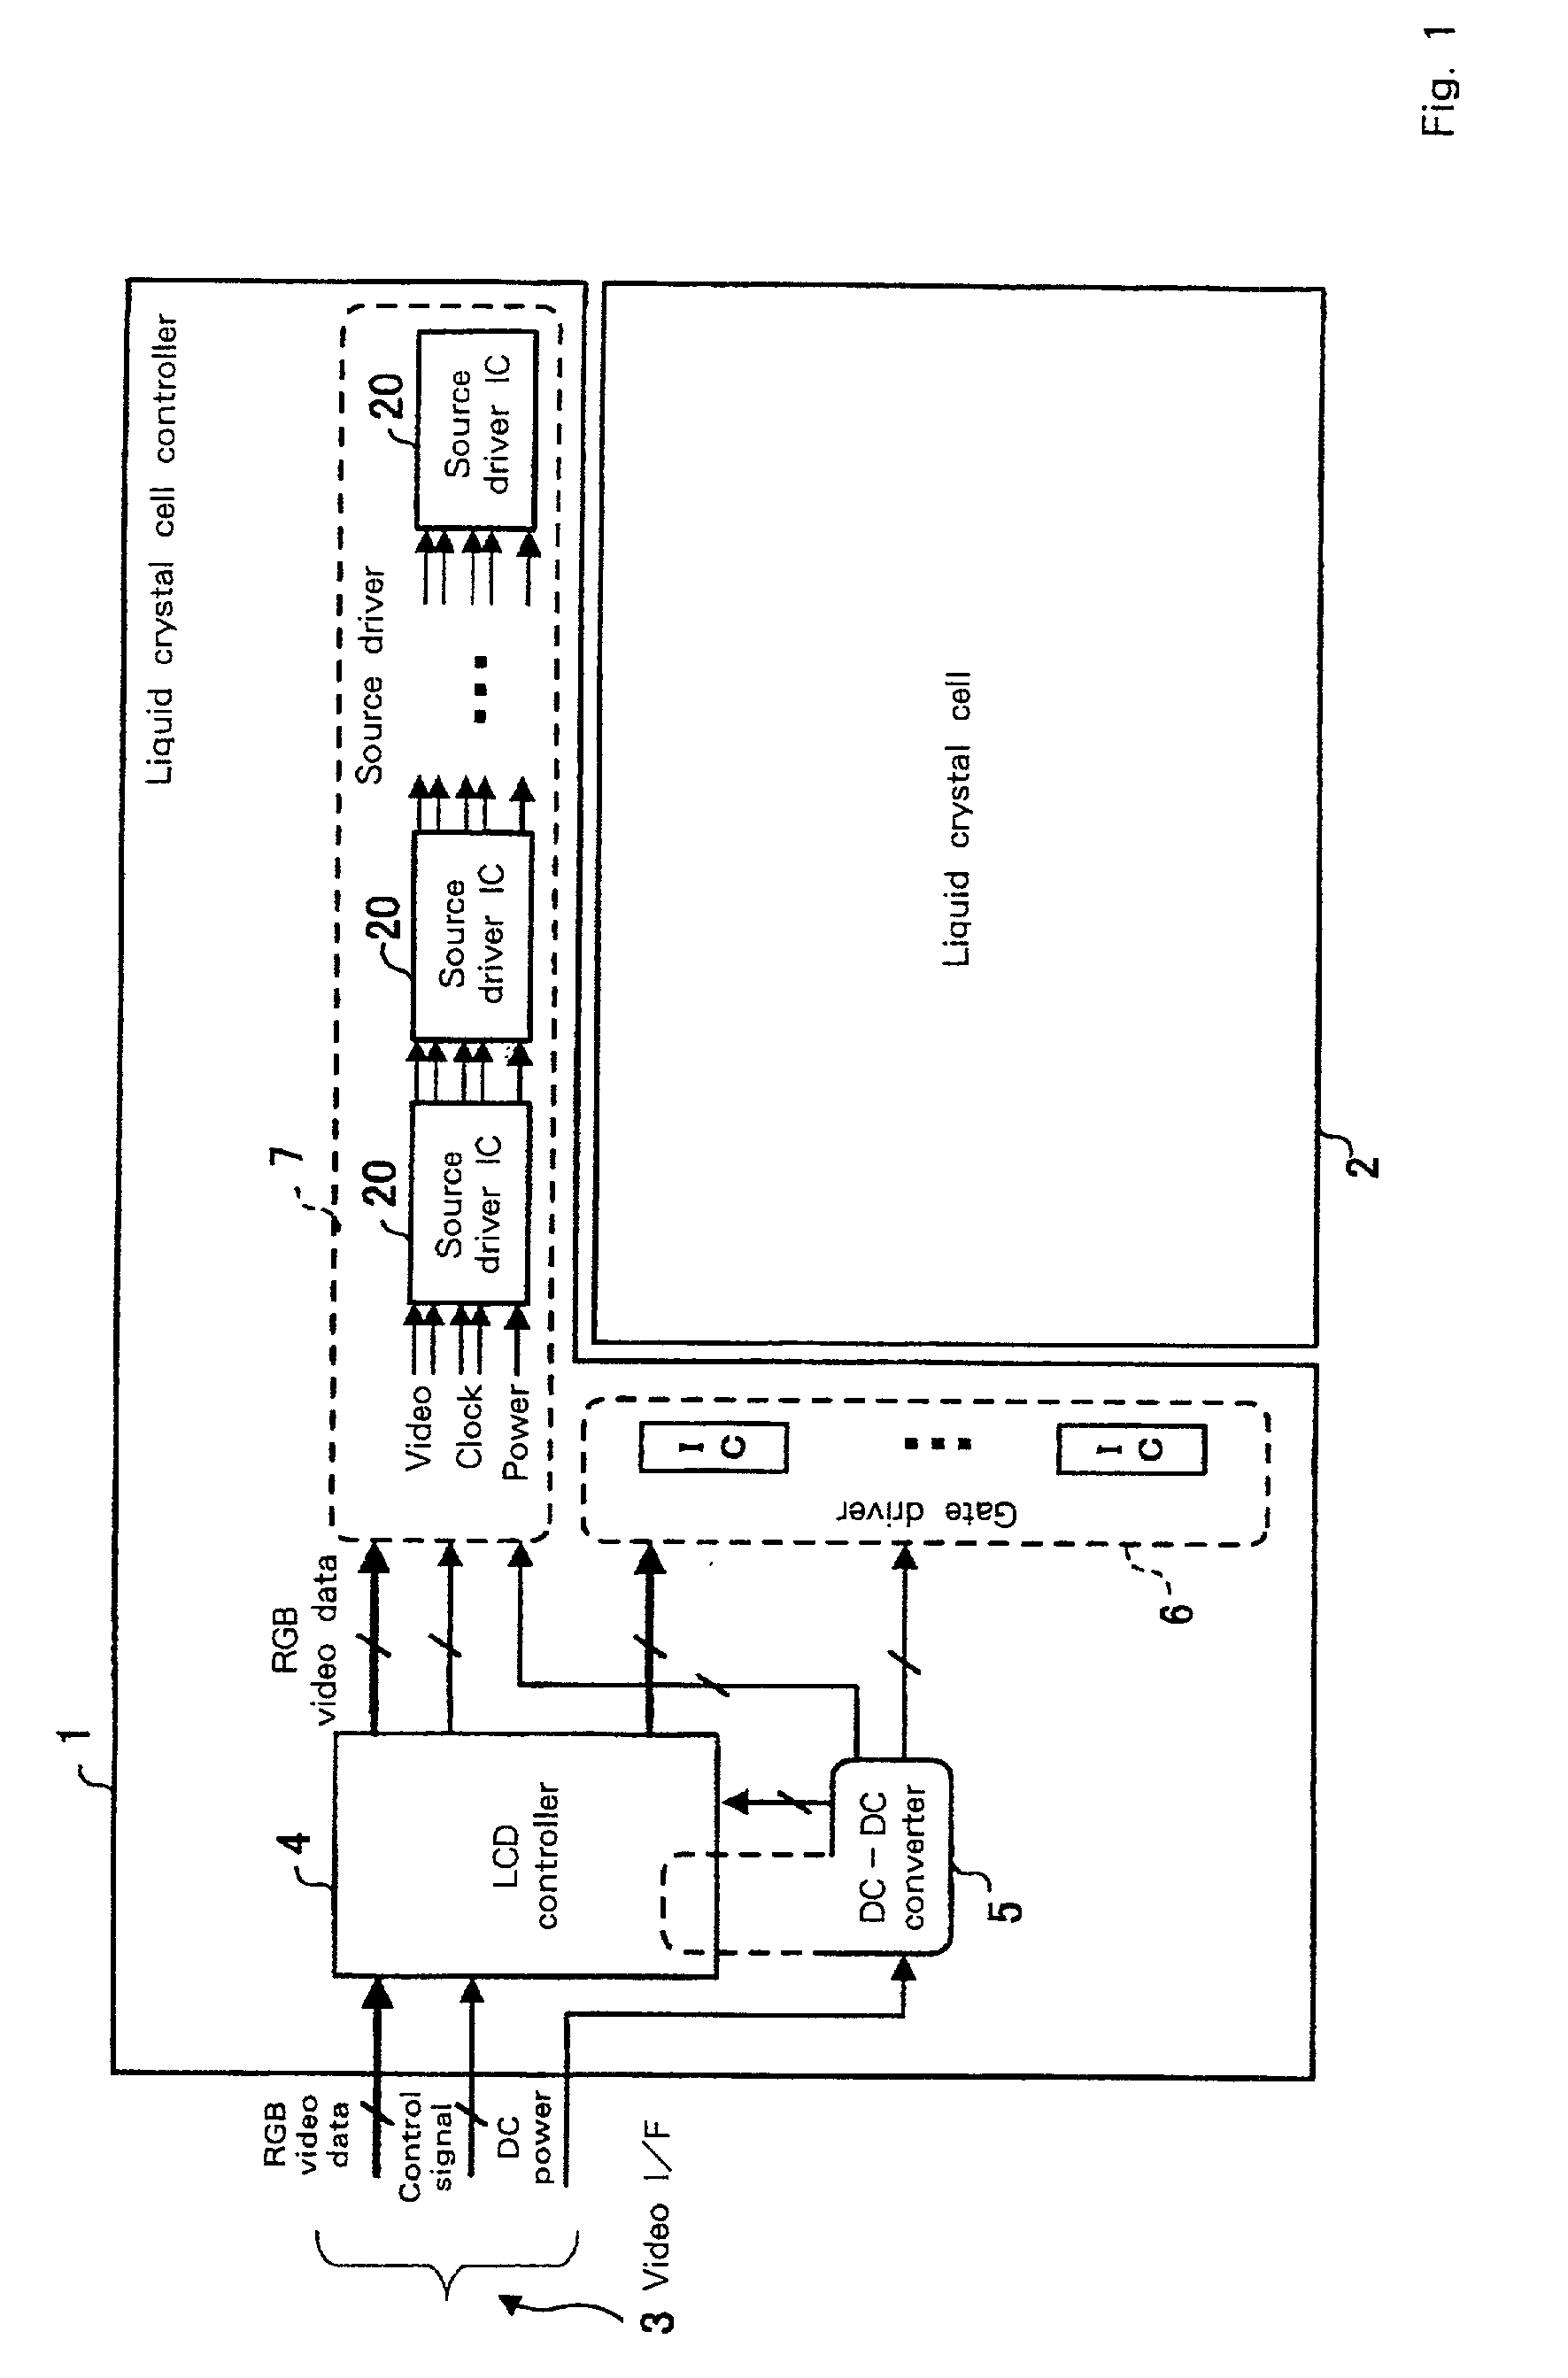 Liquid crystal display device, liquid crystal controller and video signal transmission method